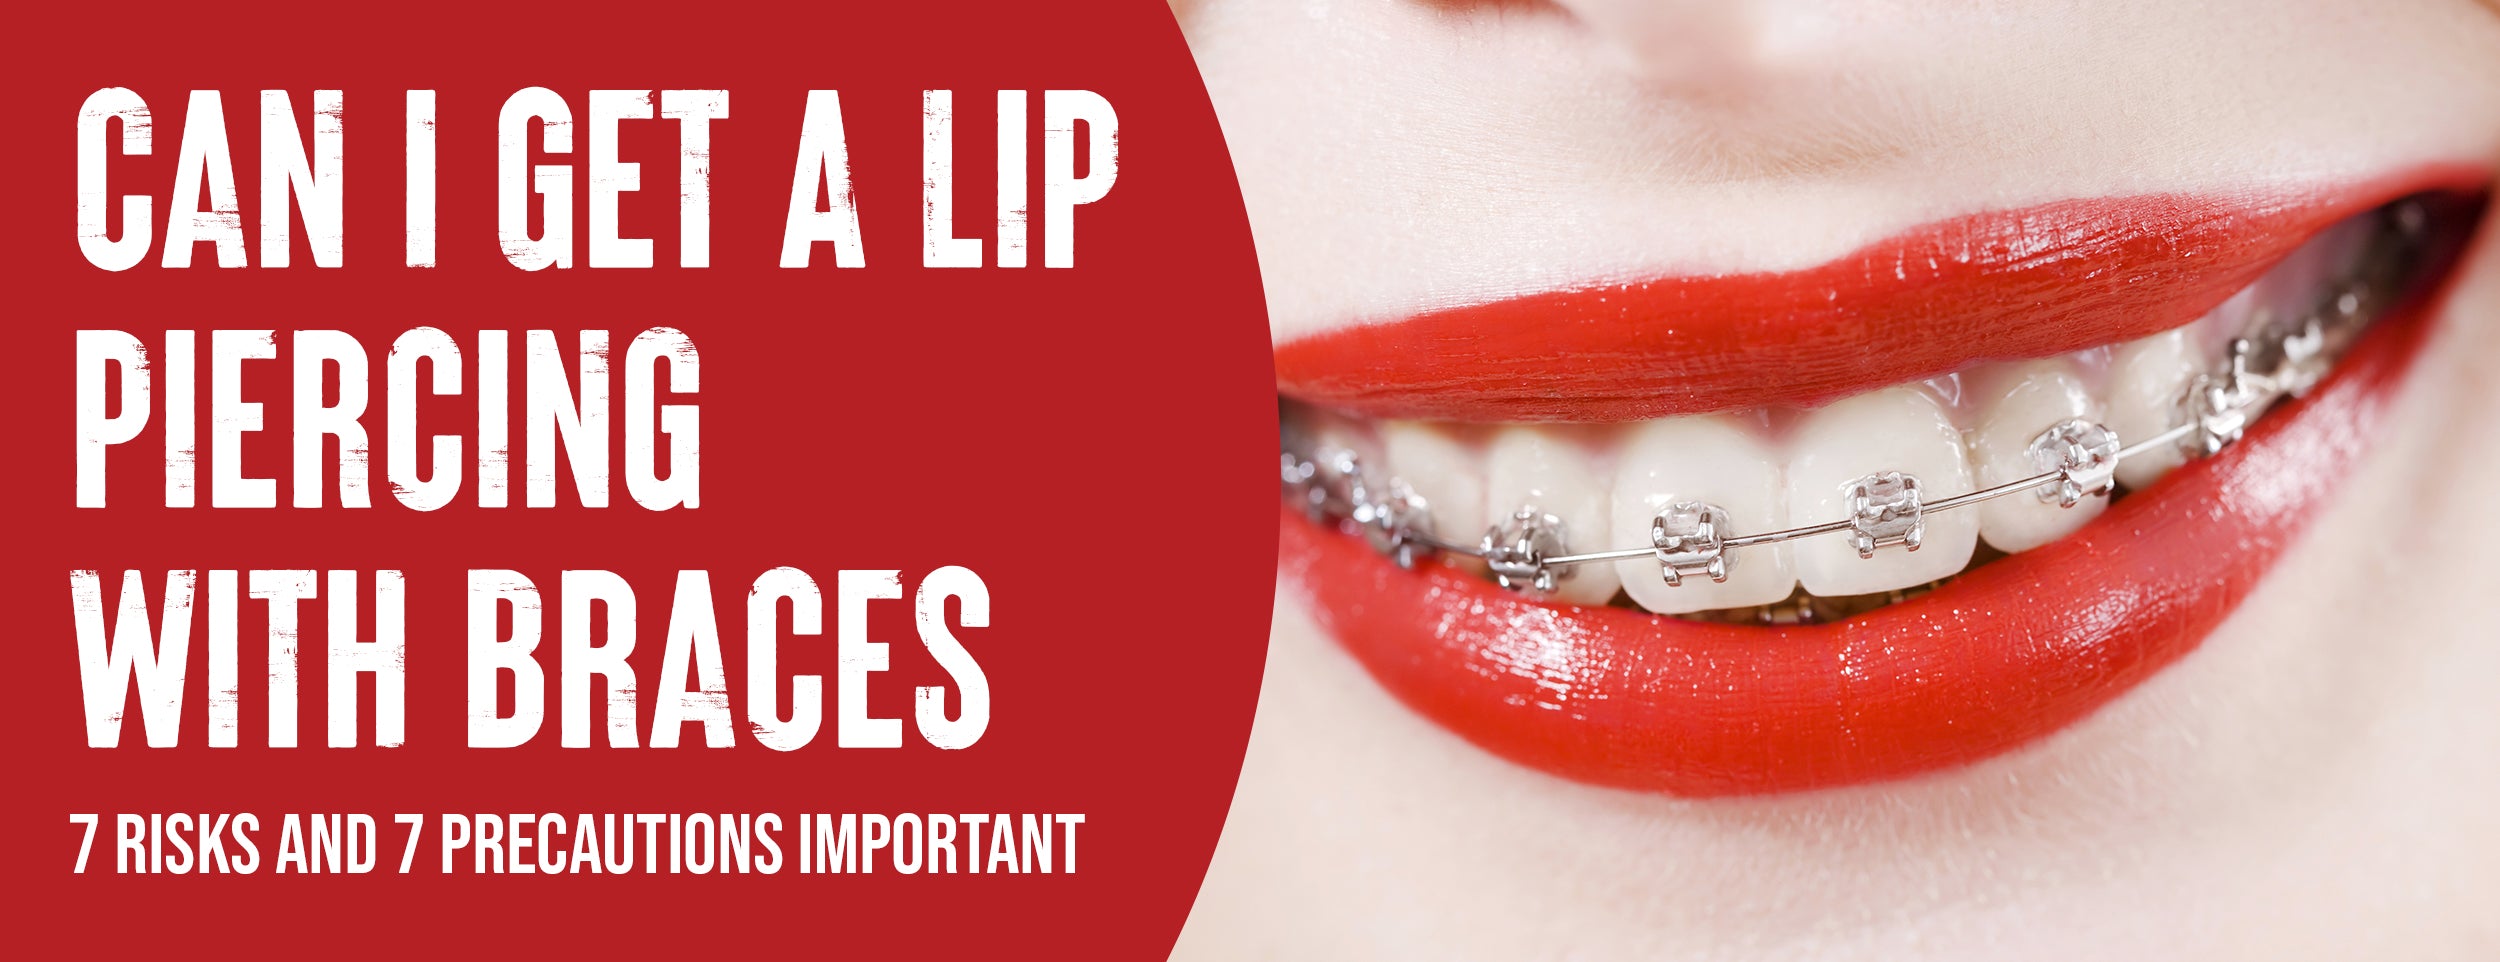 Can I Get A Lip Piercing With Braces: 7 Risks & 7 Precautions [Important]